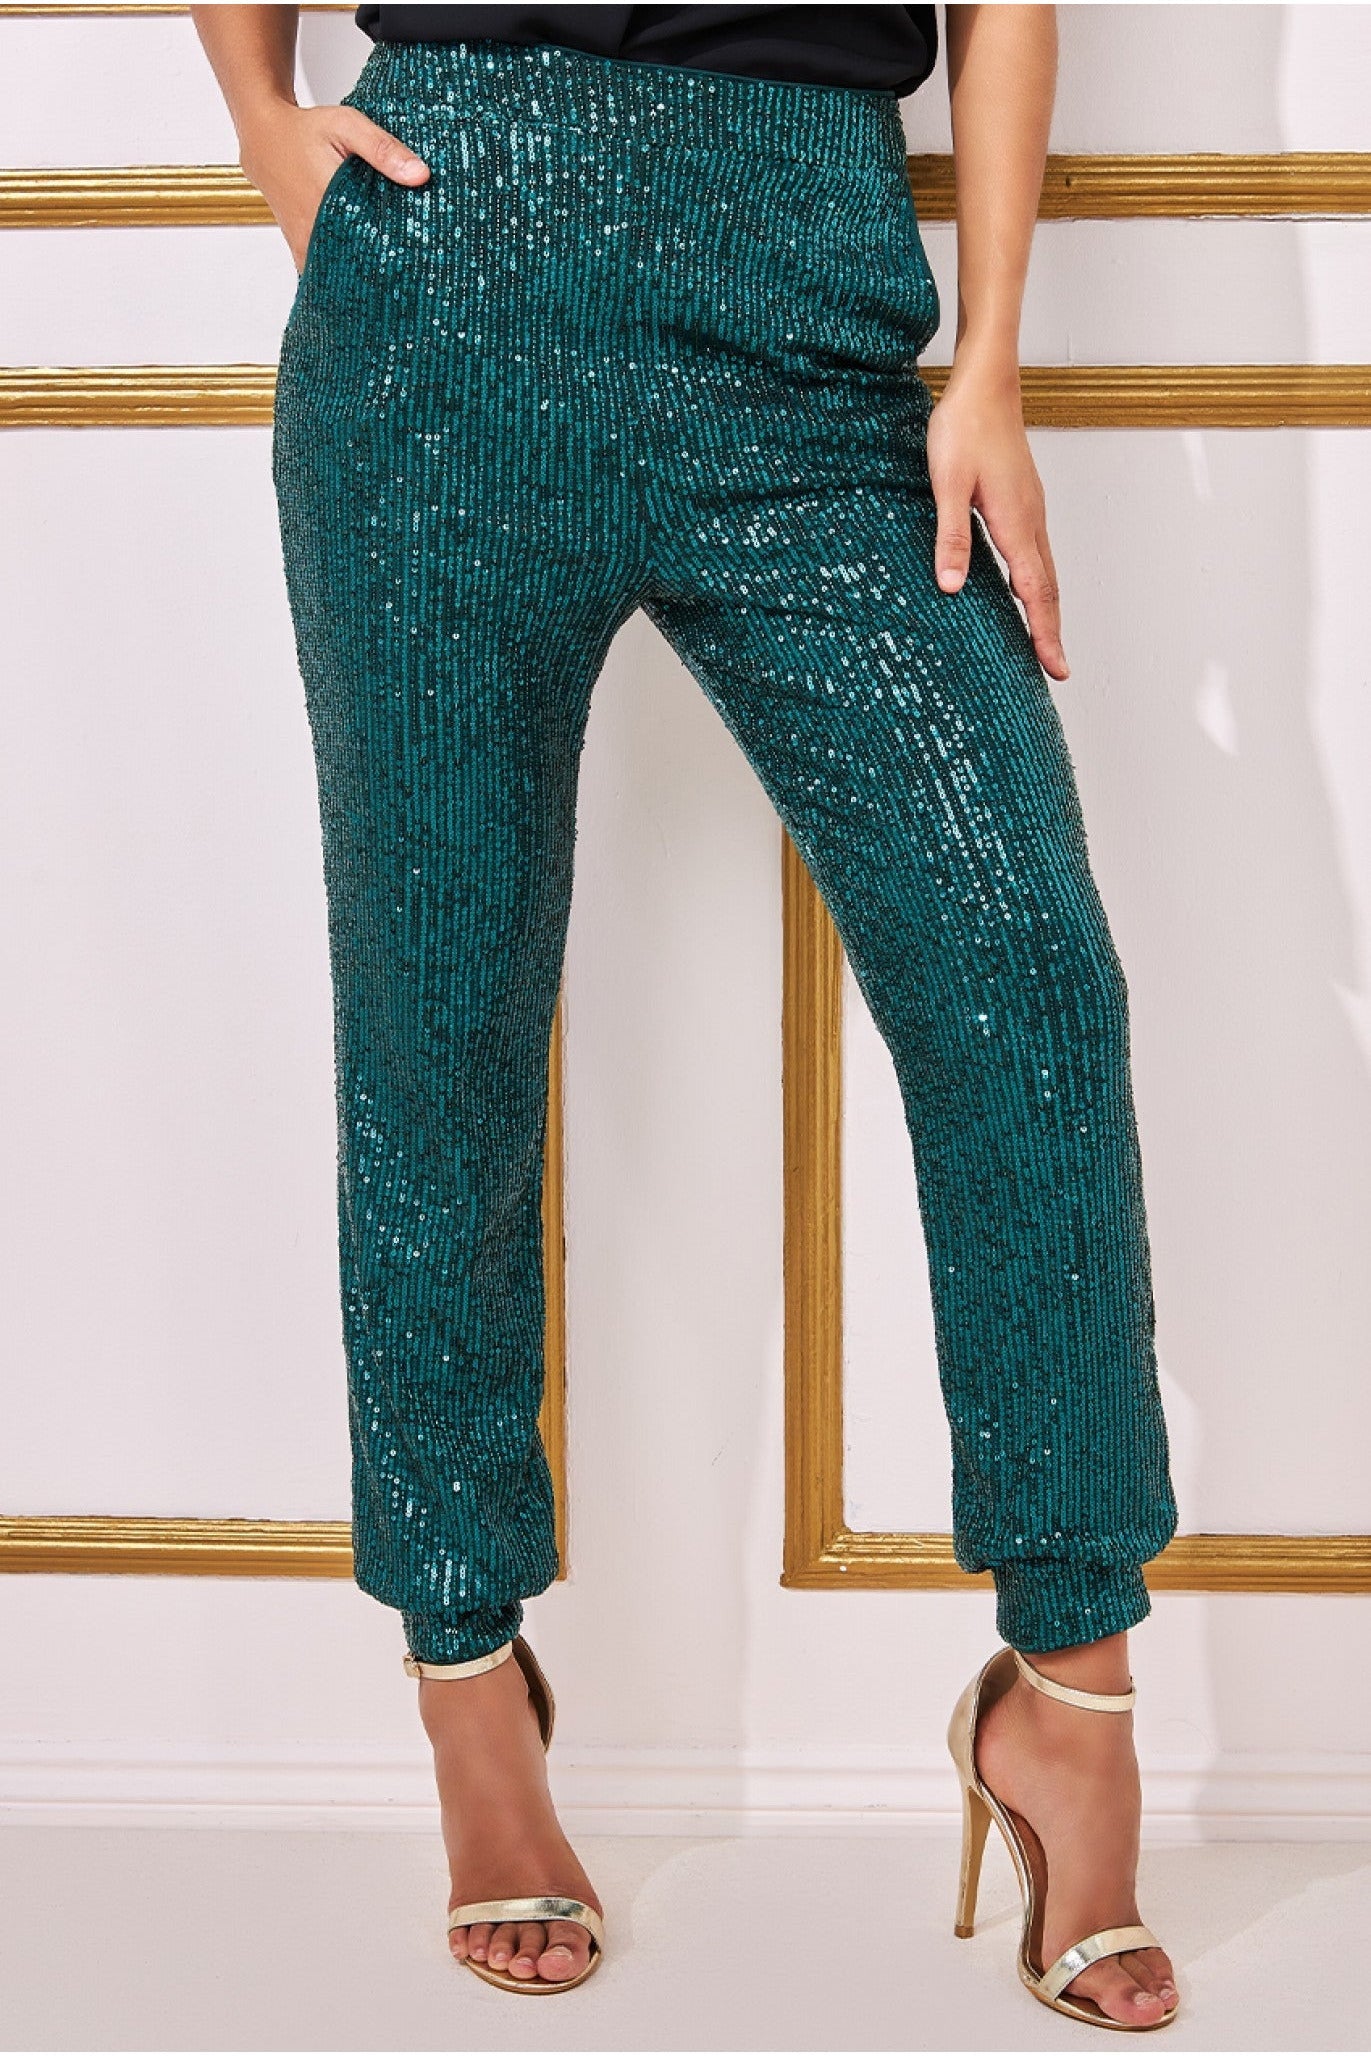 Sequin Cuffed Ankle Trouser - Emerald TR360